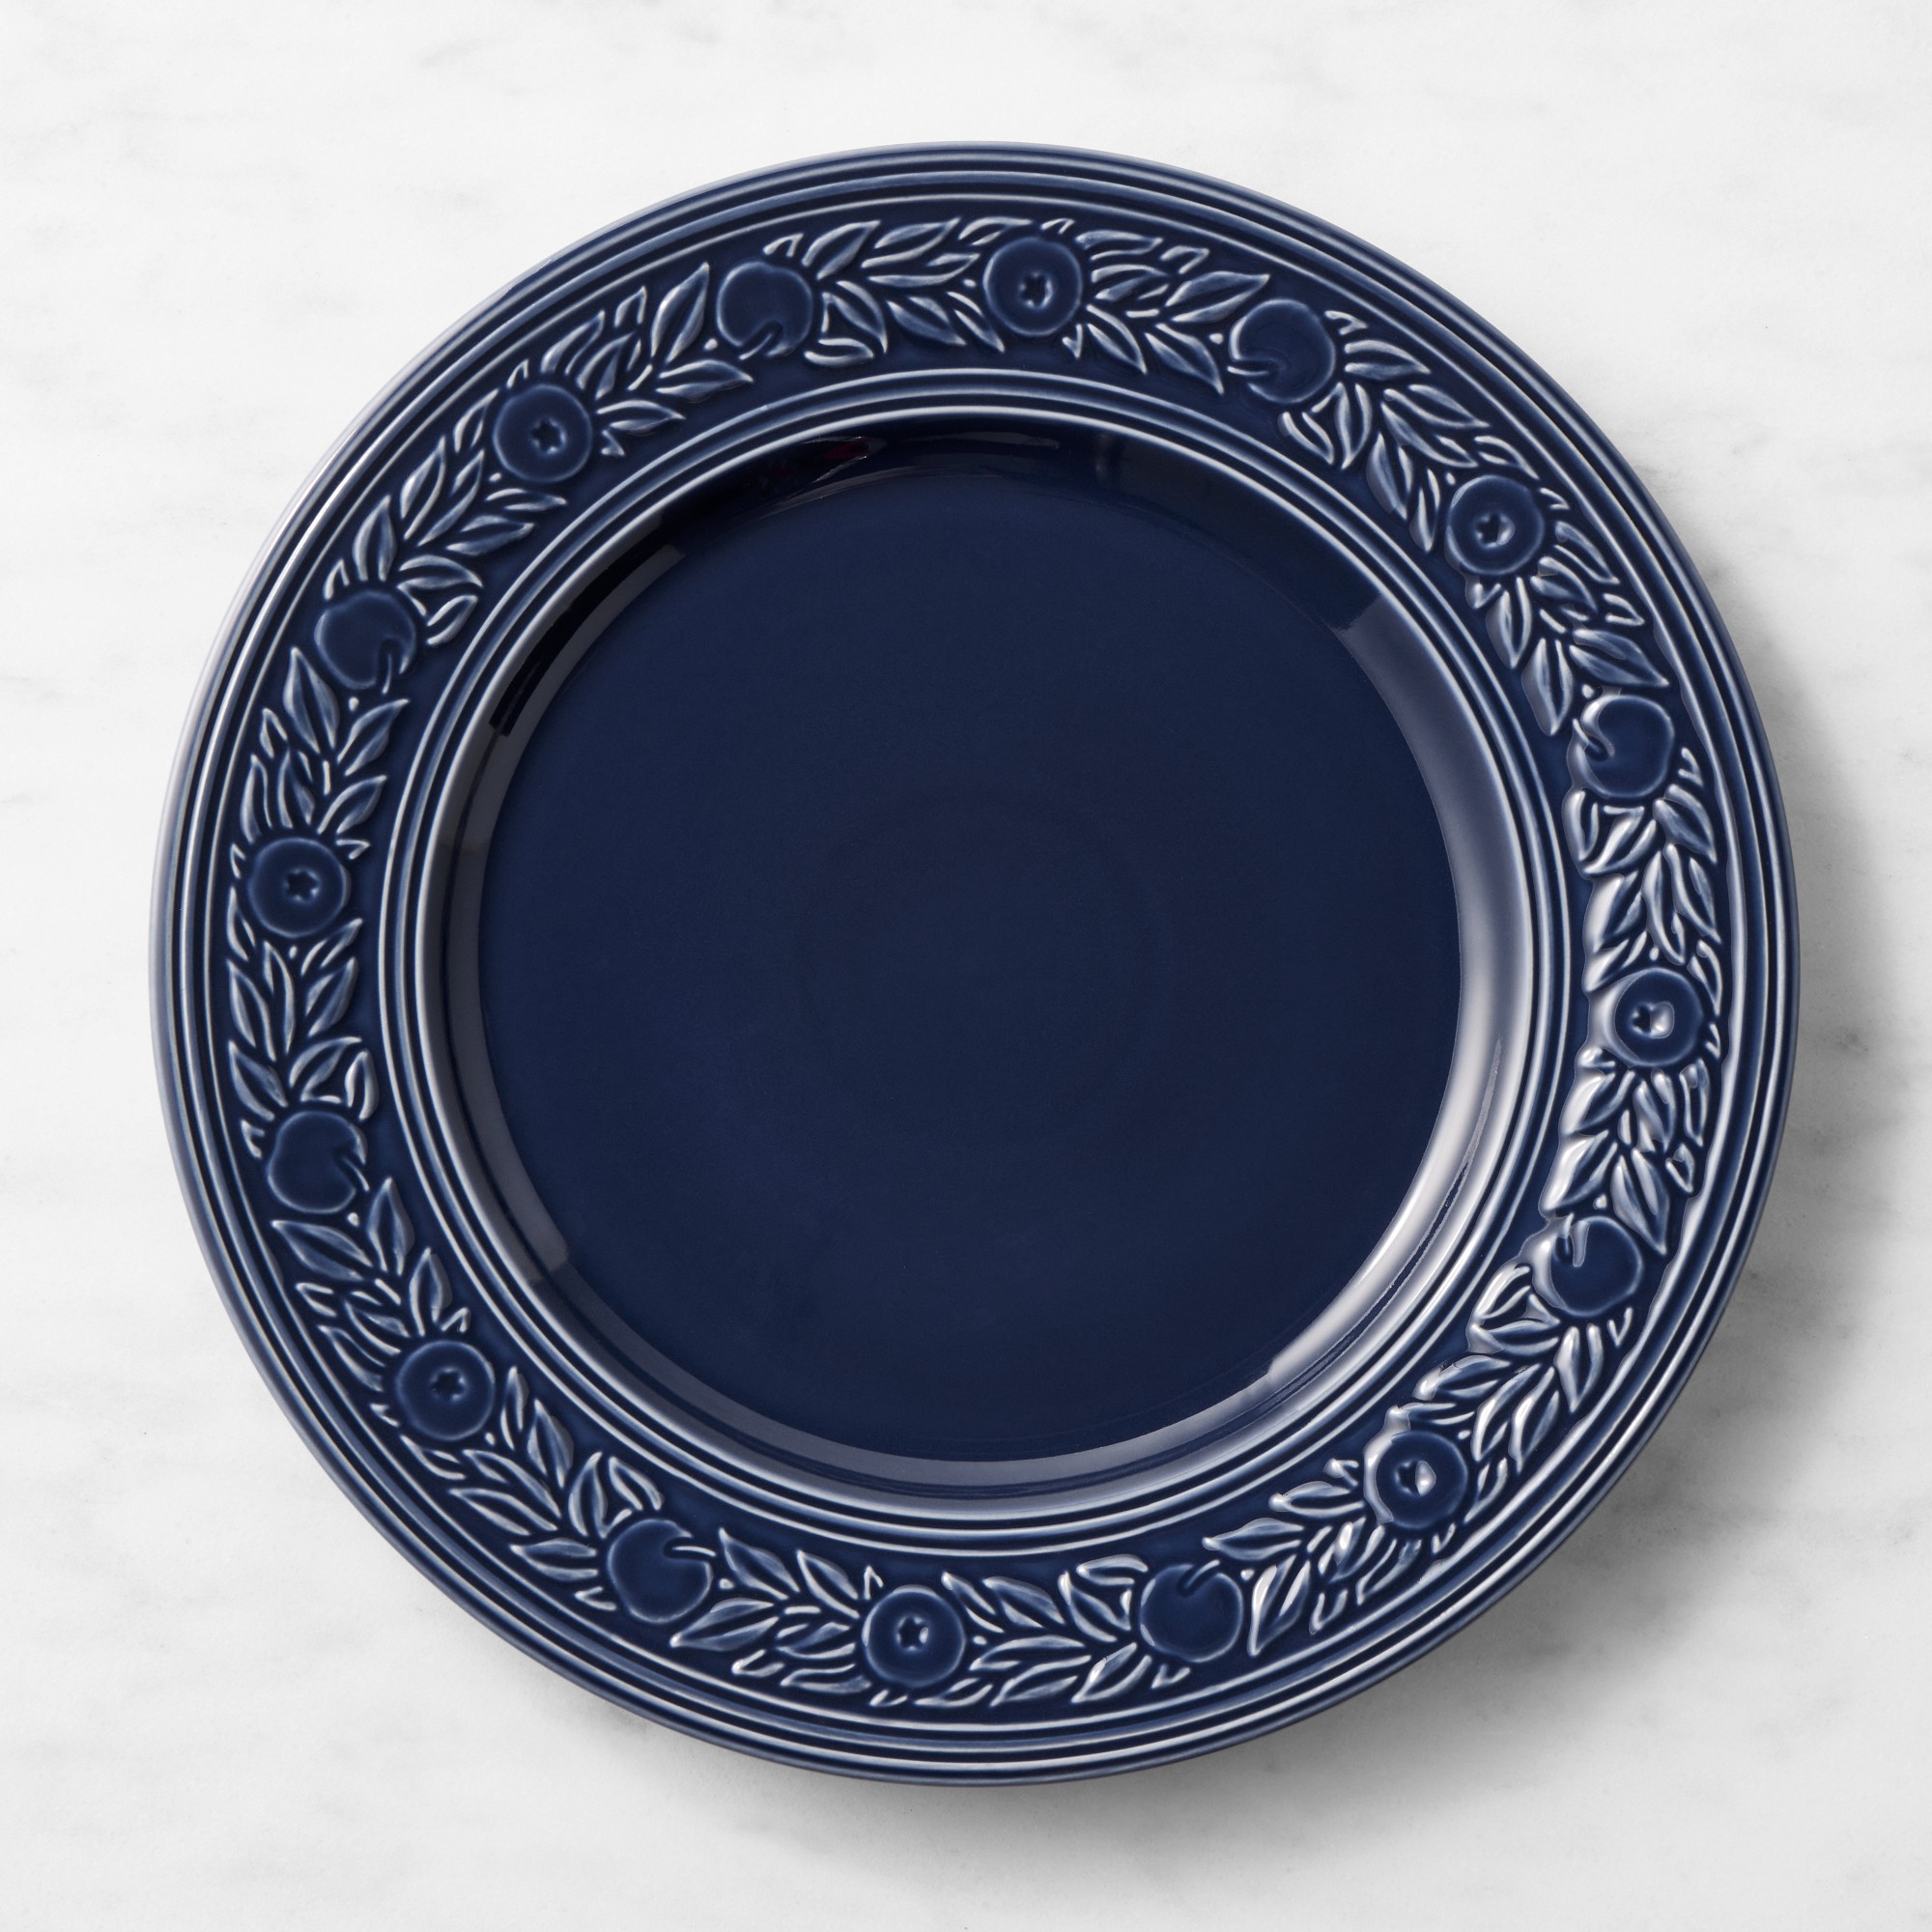 Williams Sonoma x Morris & Co. Cotswold Stoneware Charger